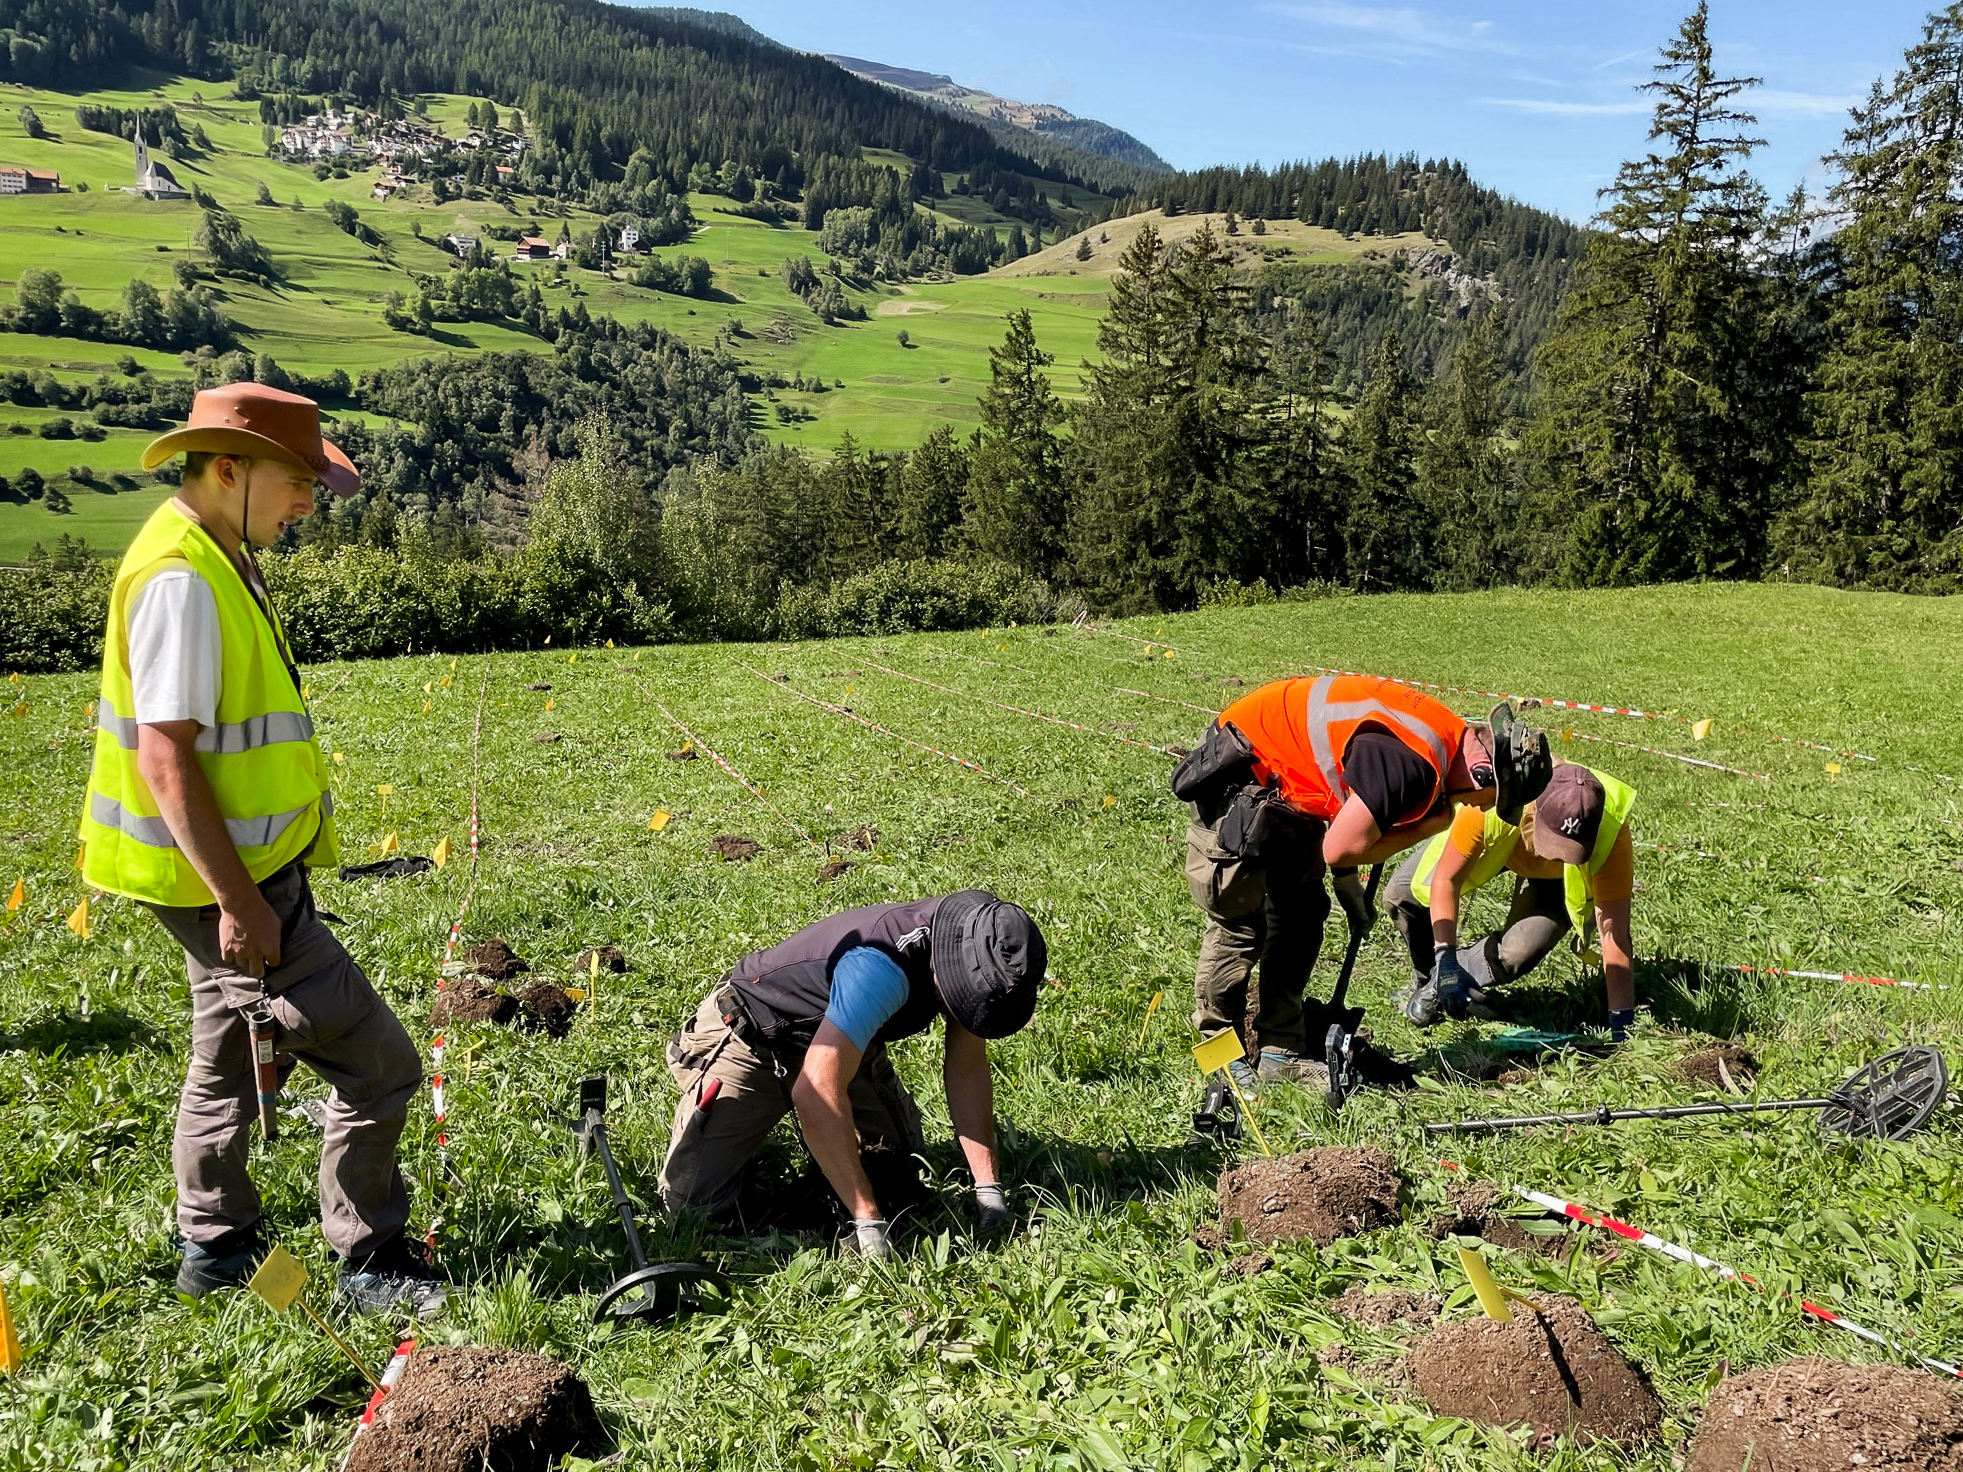 Archaeologists dig for Roman artefacts at site in canton Graubünden.